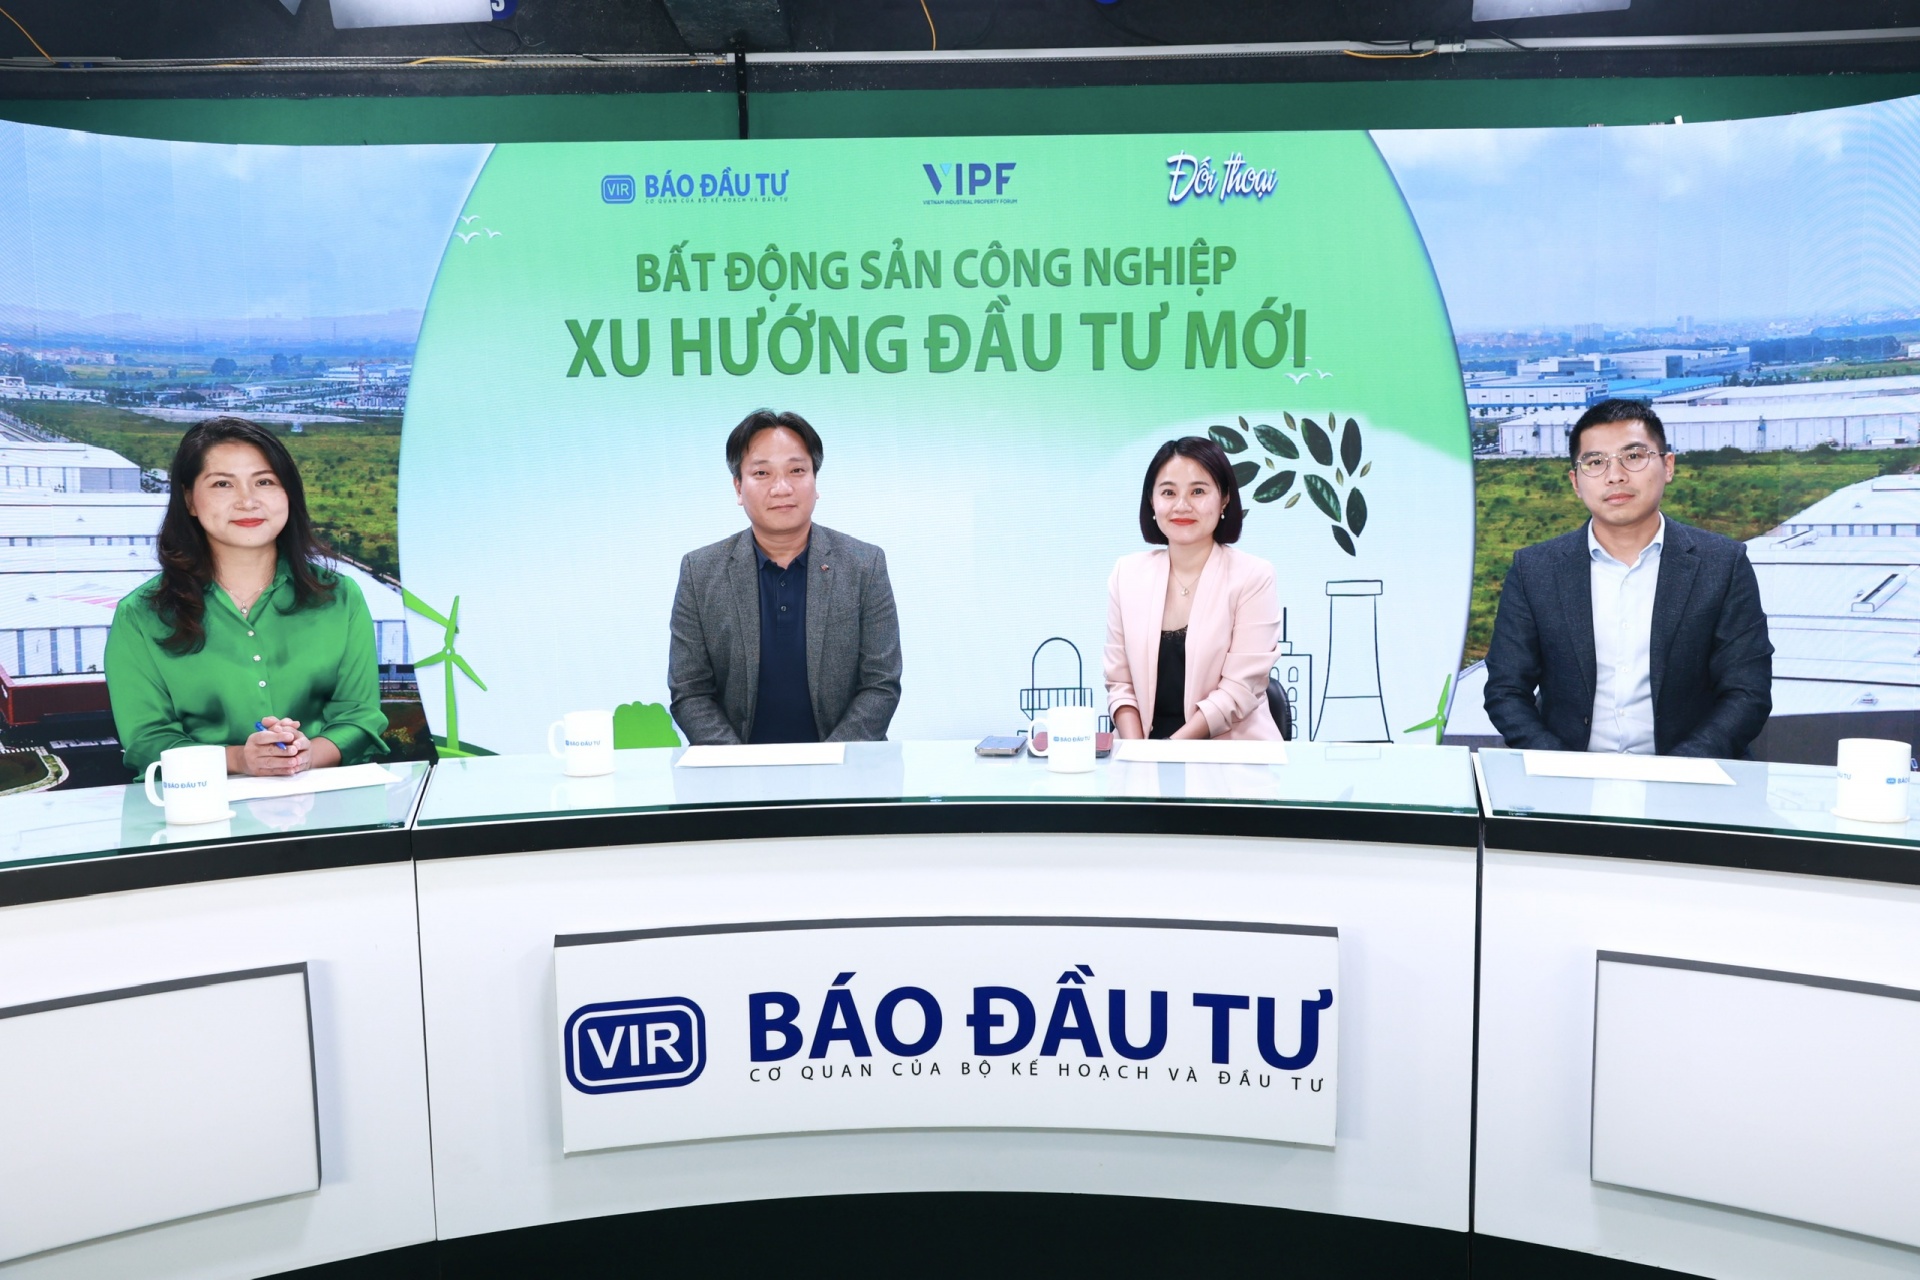 Lower competitiveness affecting Vietnam's industrial parks